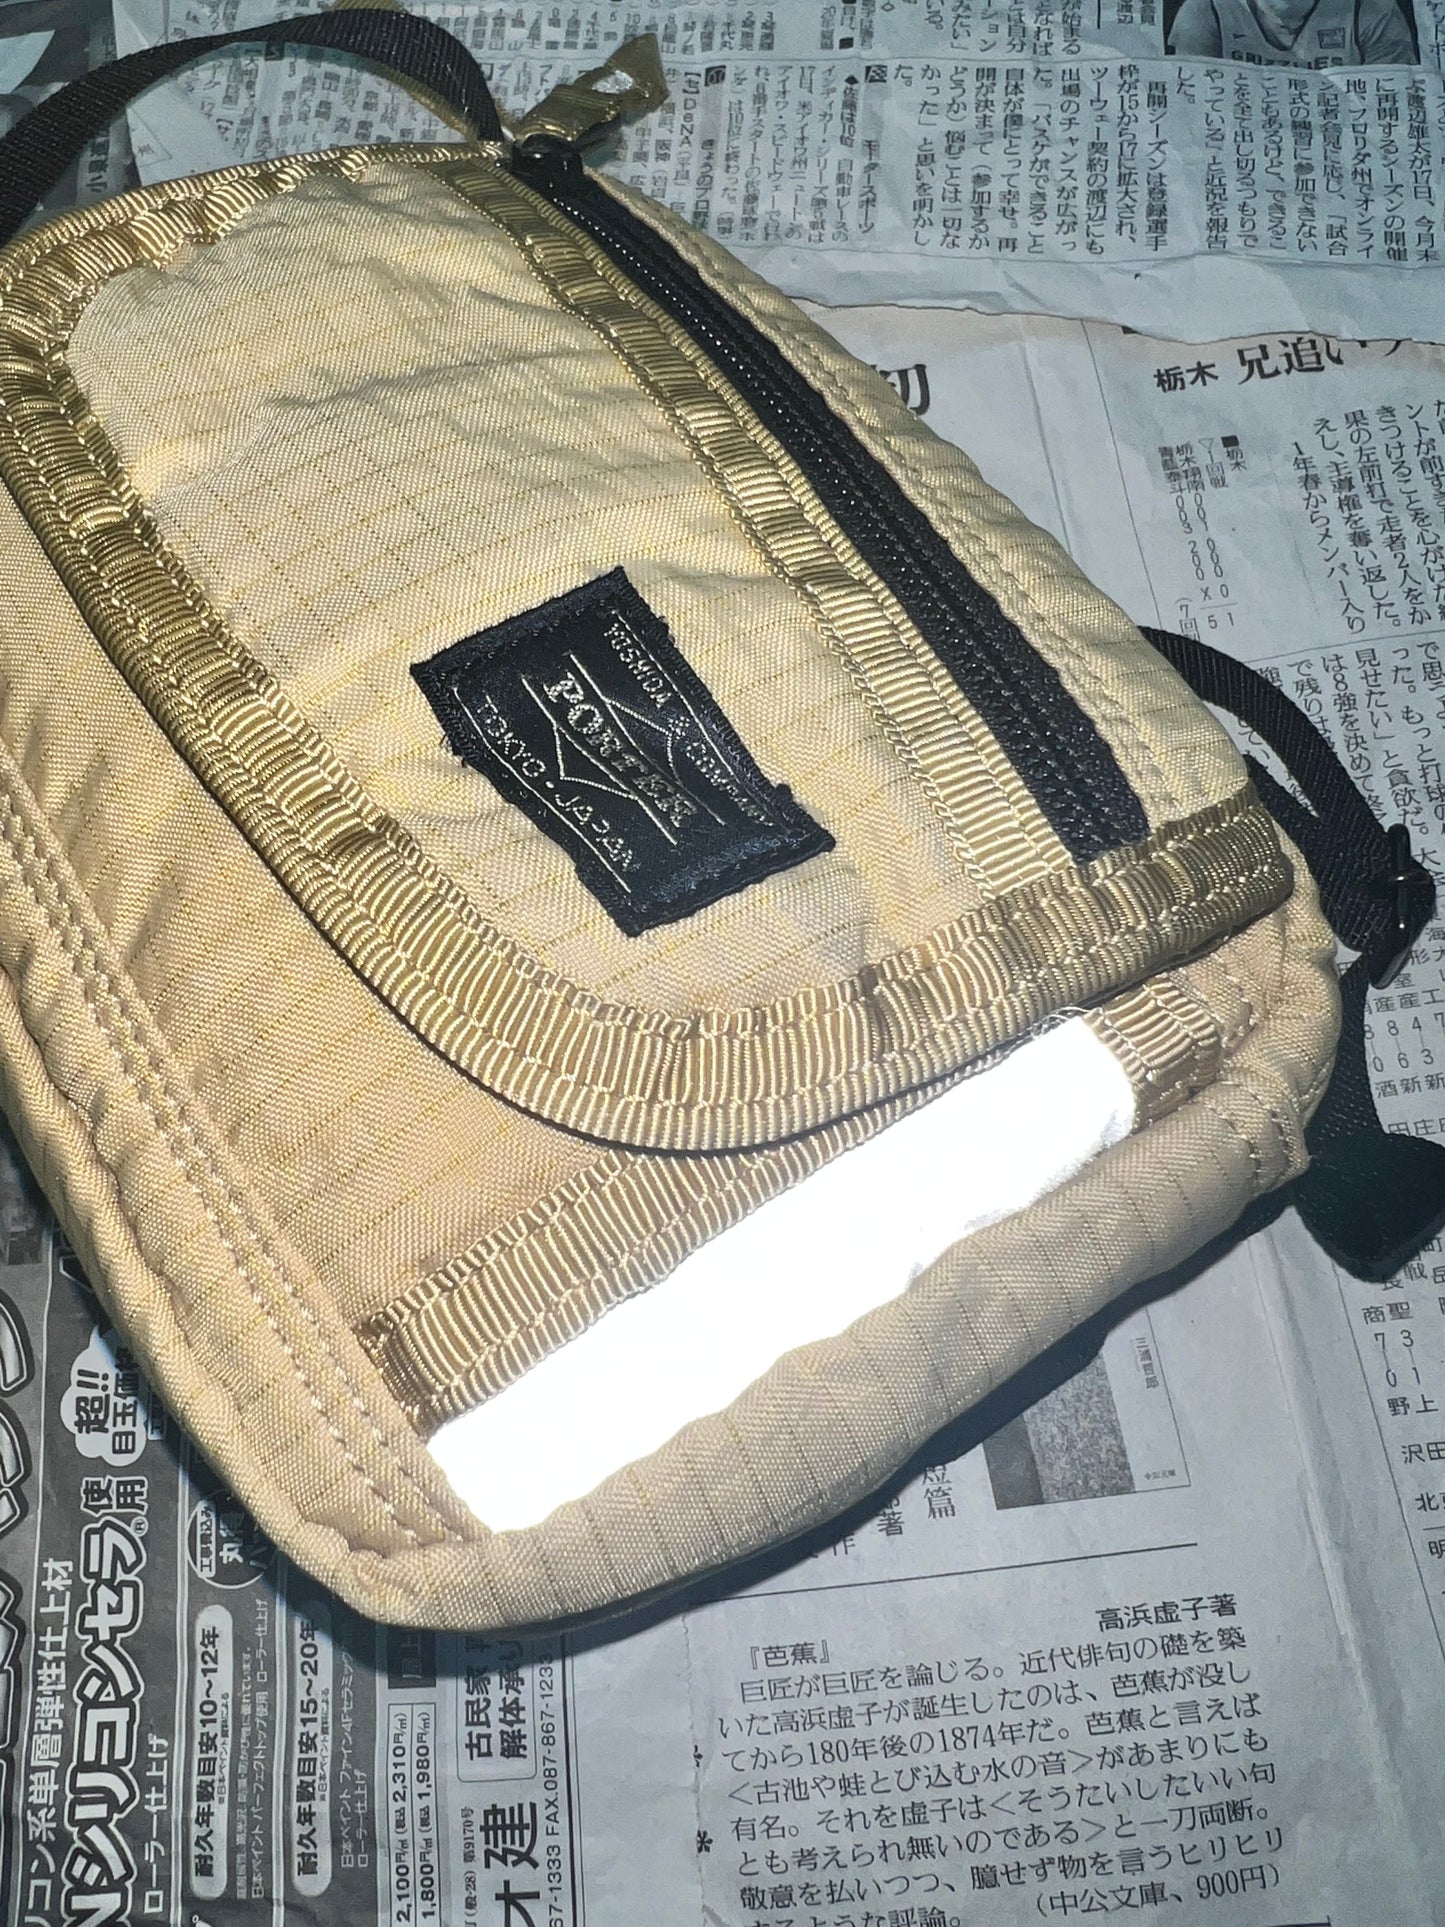 Ripstop/3M Pouch Bag